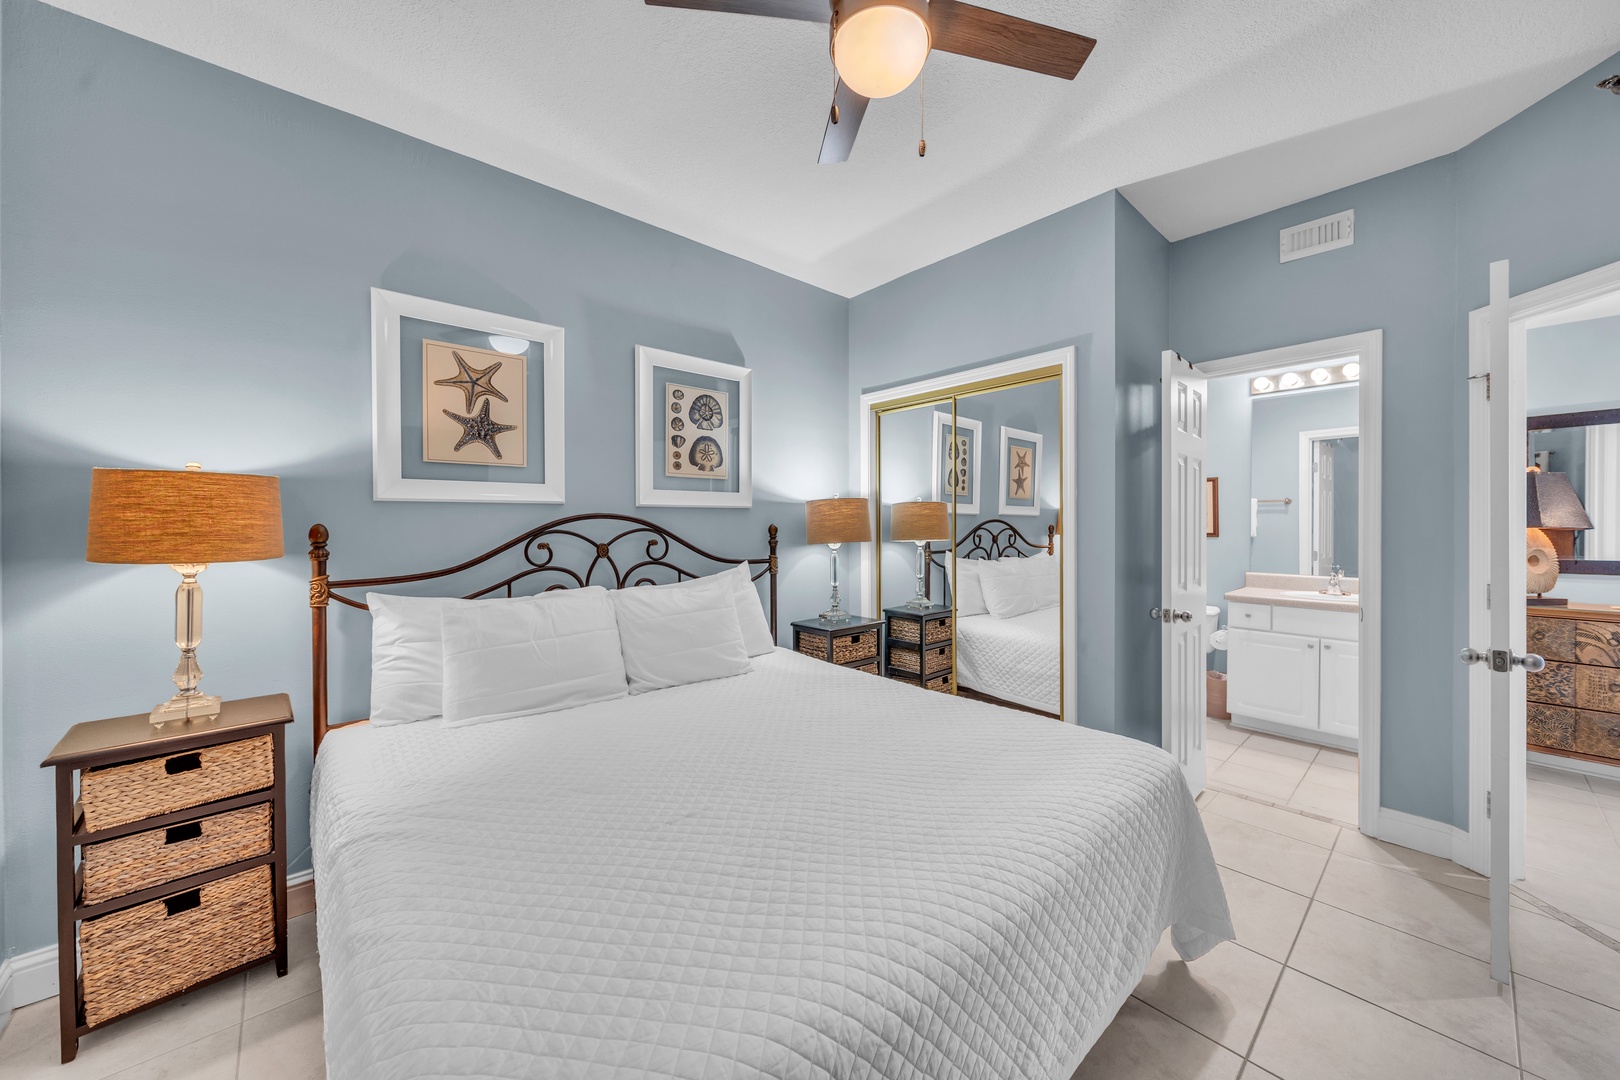 The guest bedroom echoes the luxury.